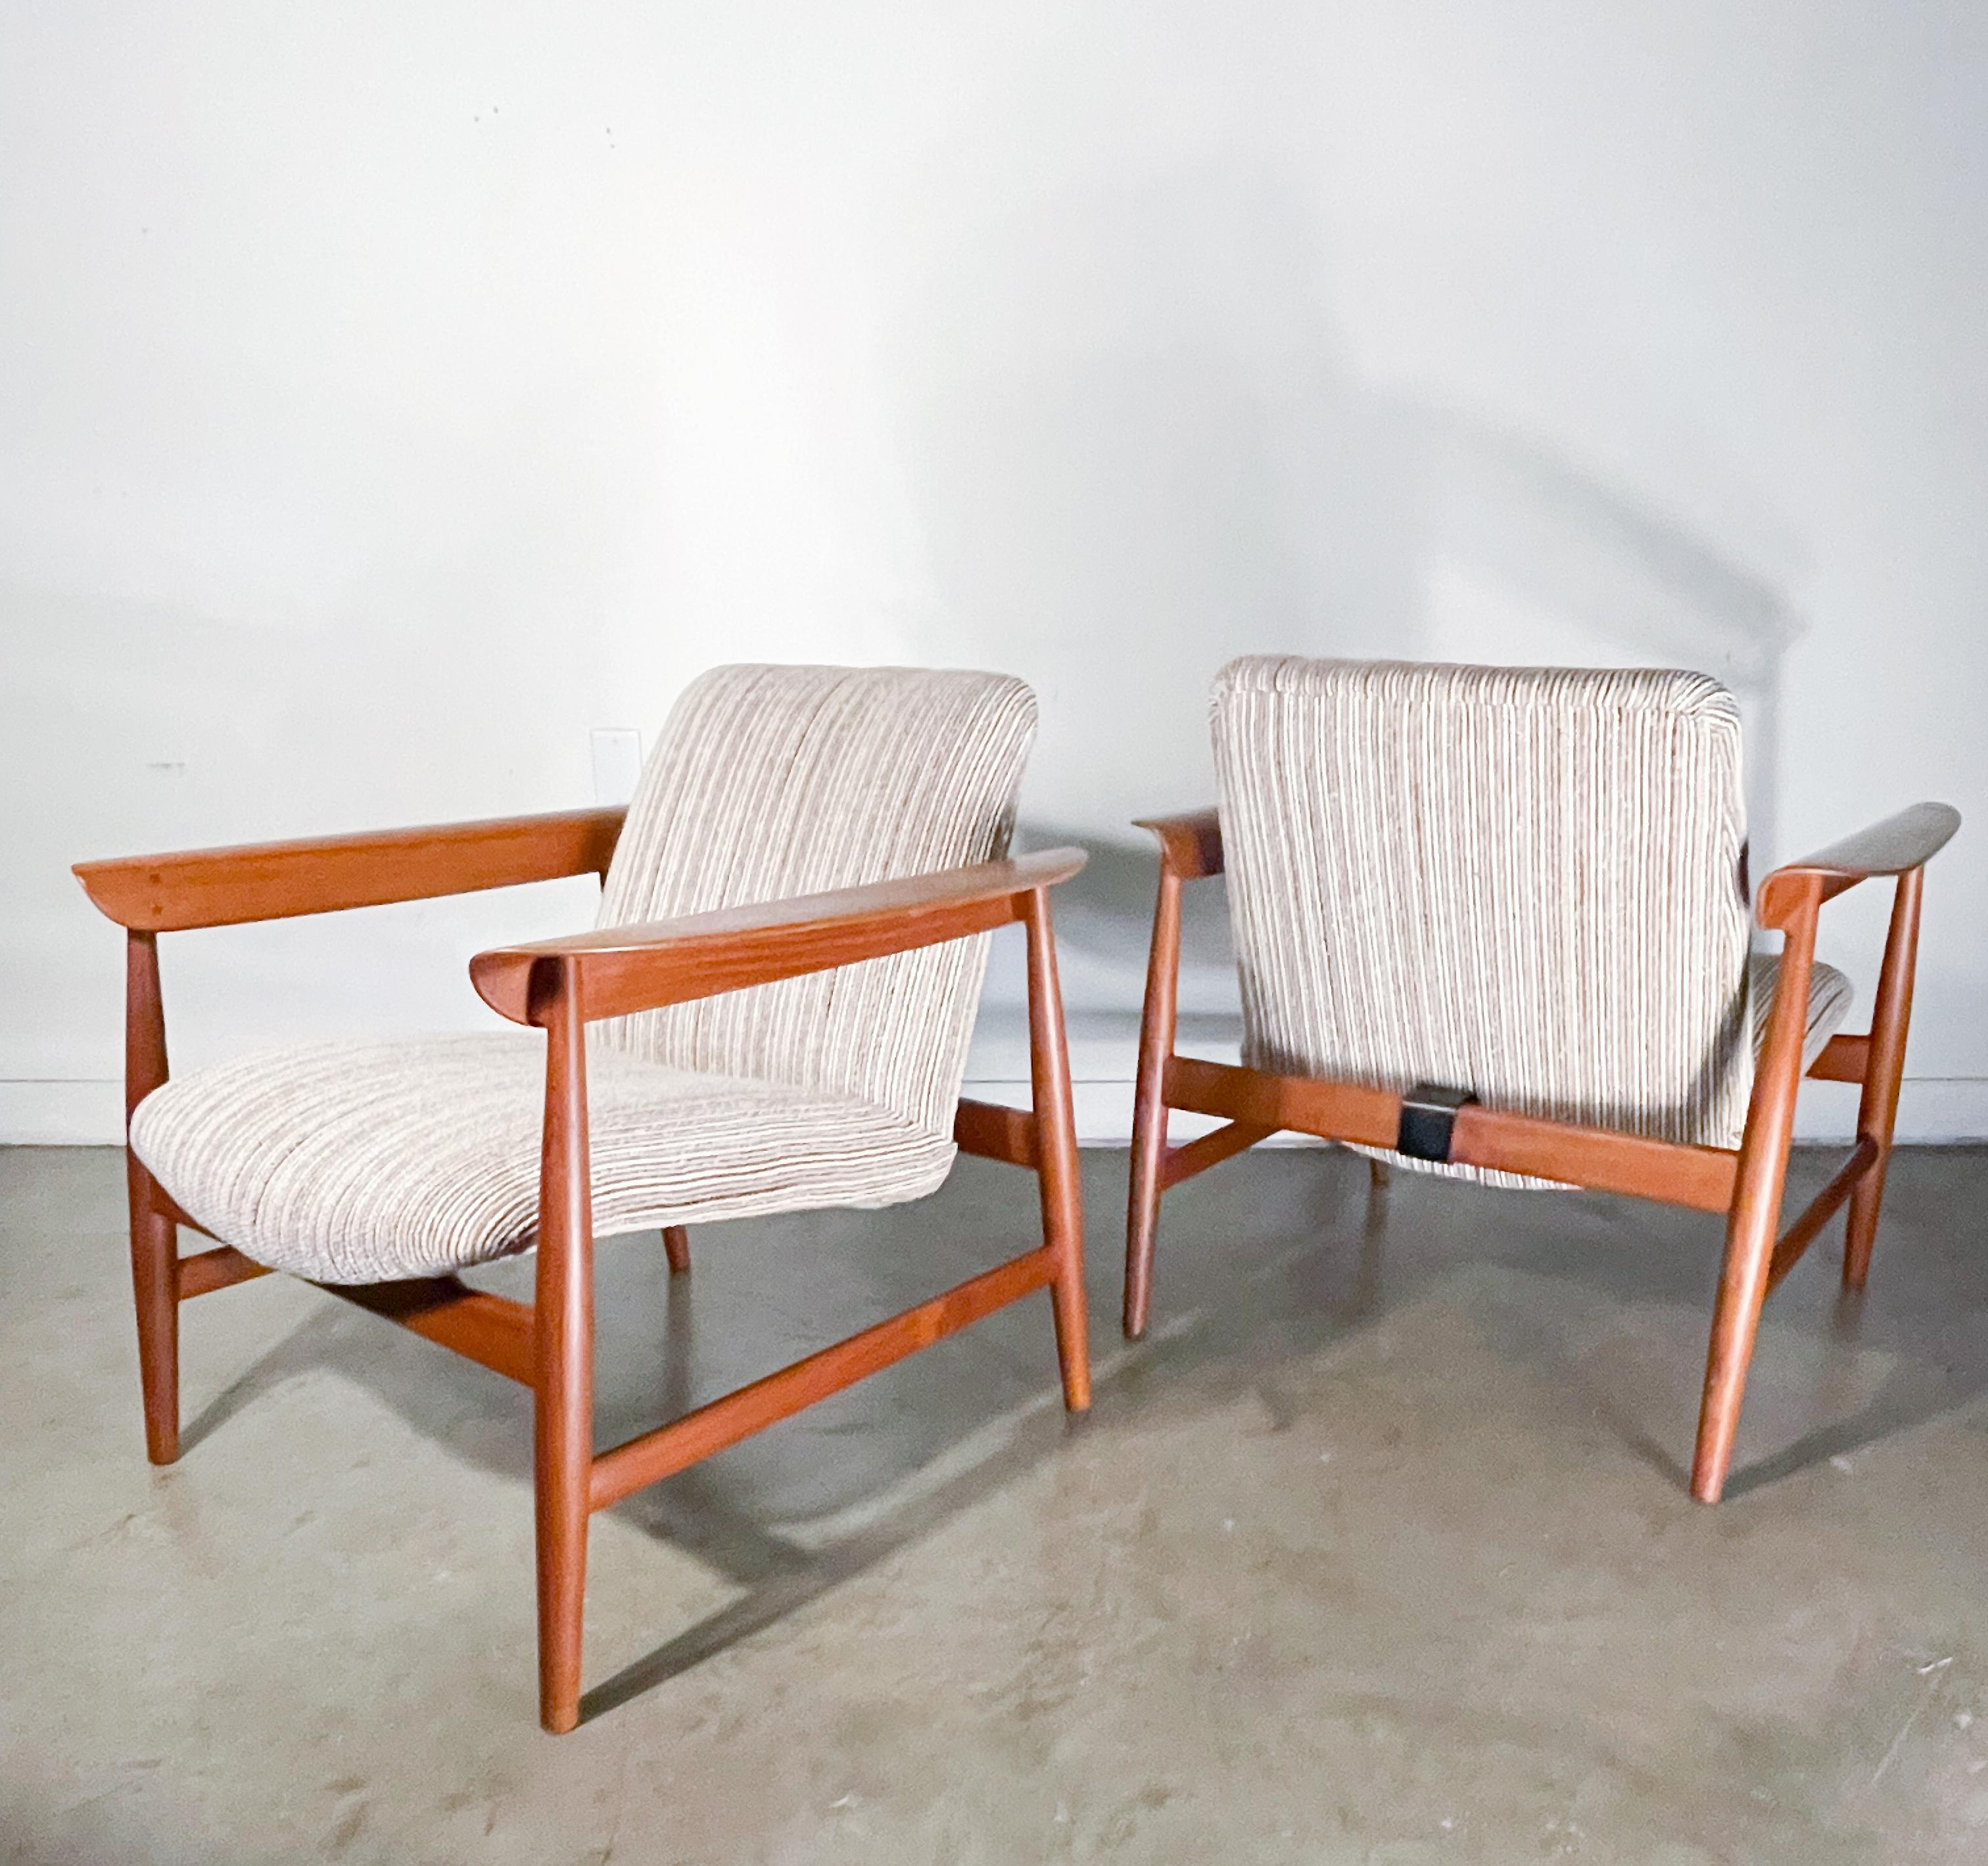 Rare and collectible lounge chairs designed by the masterful Finn Juhl for Bovirke of Denmark. Solid teak frames with bent teak plywood arms cradle an upholstered steel tube seat frame. Distinctive armrests with subtle dowel head details, sculpted